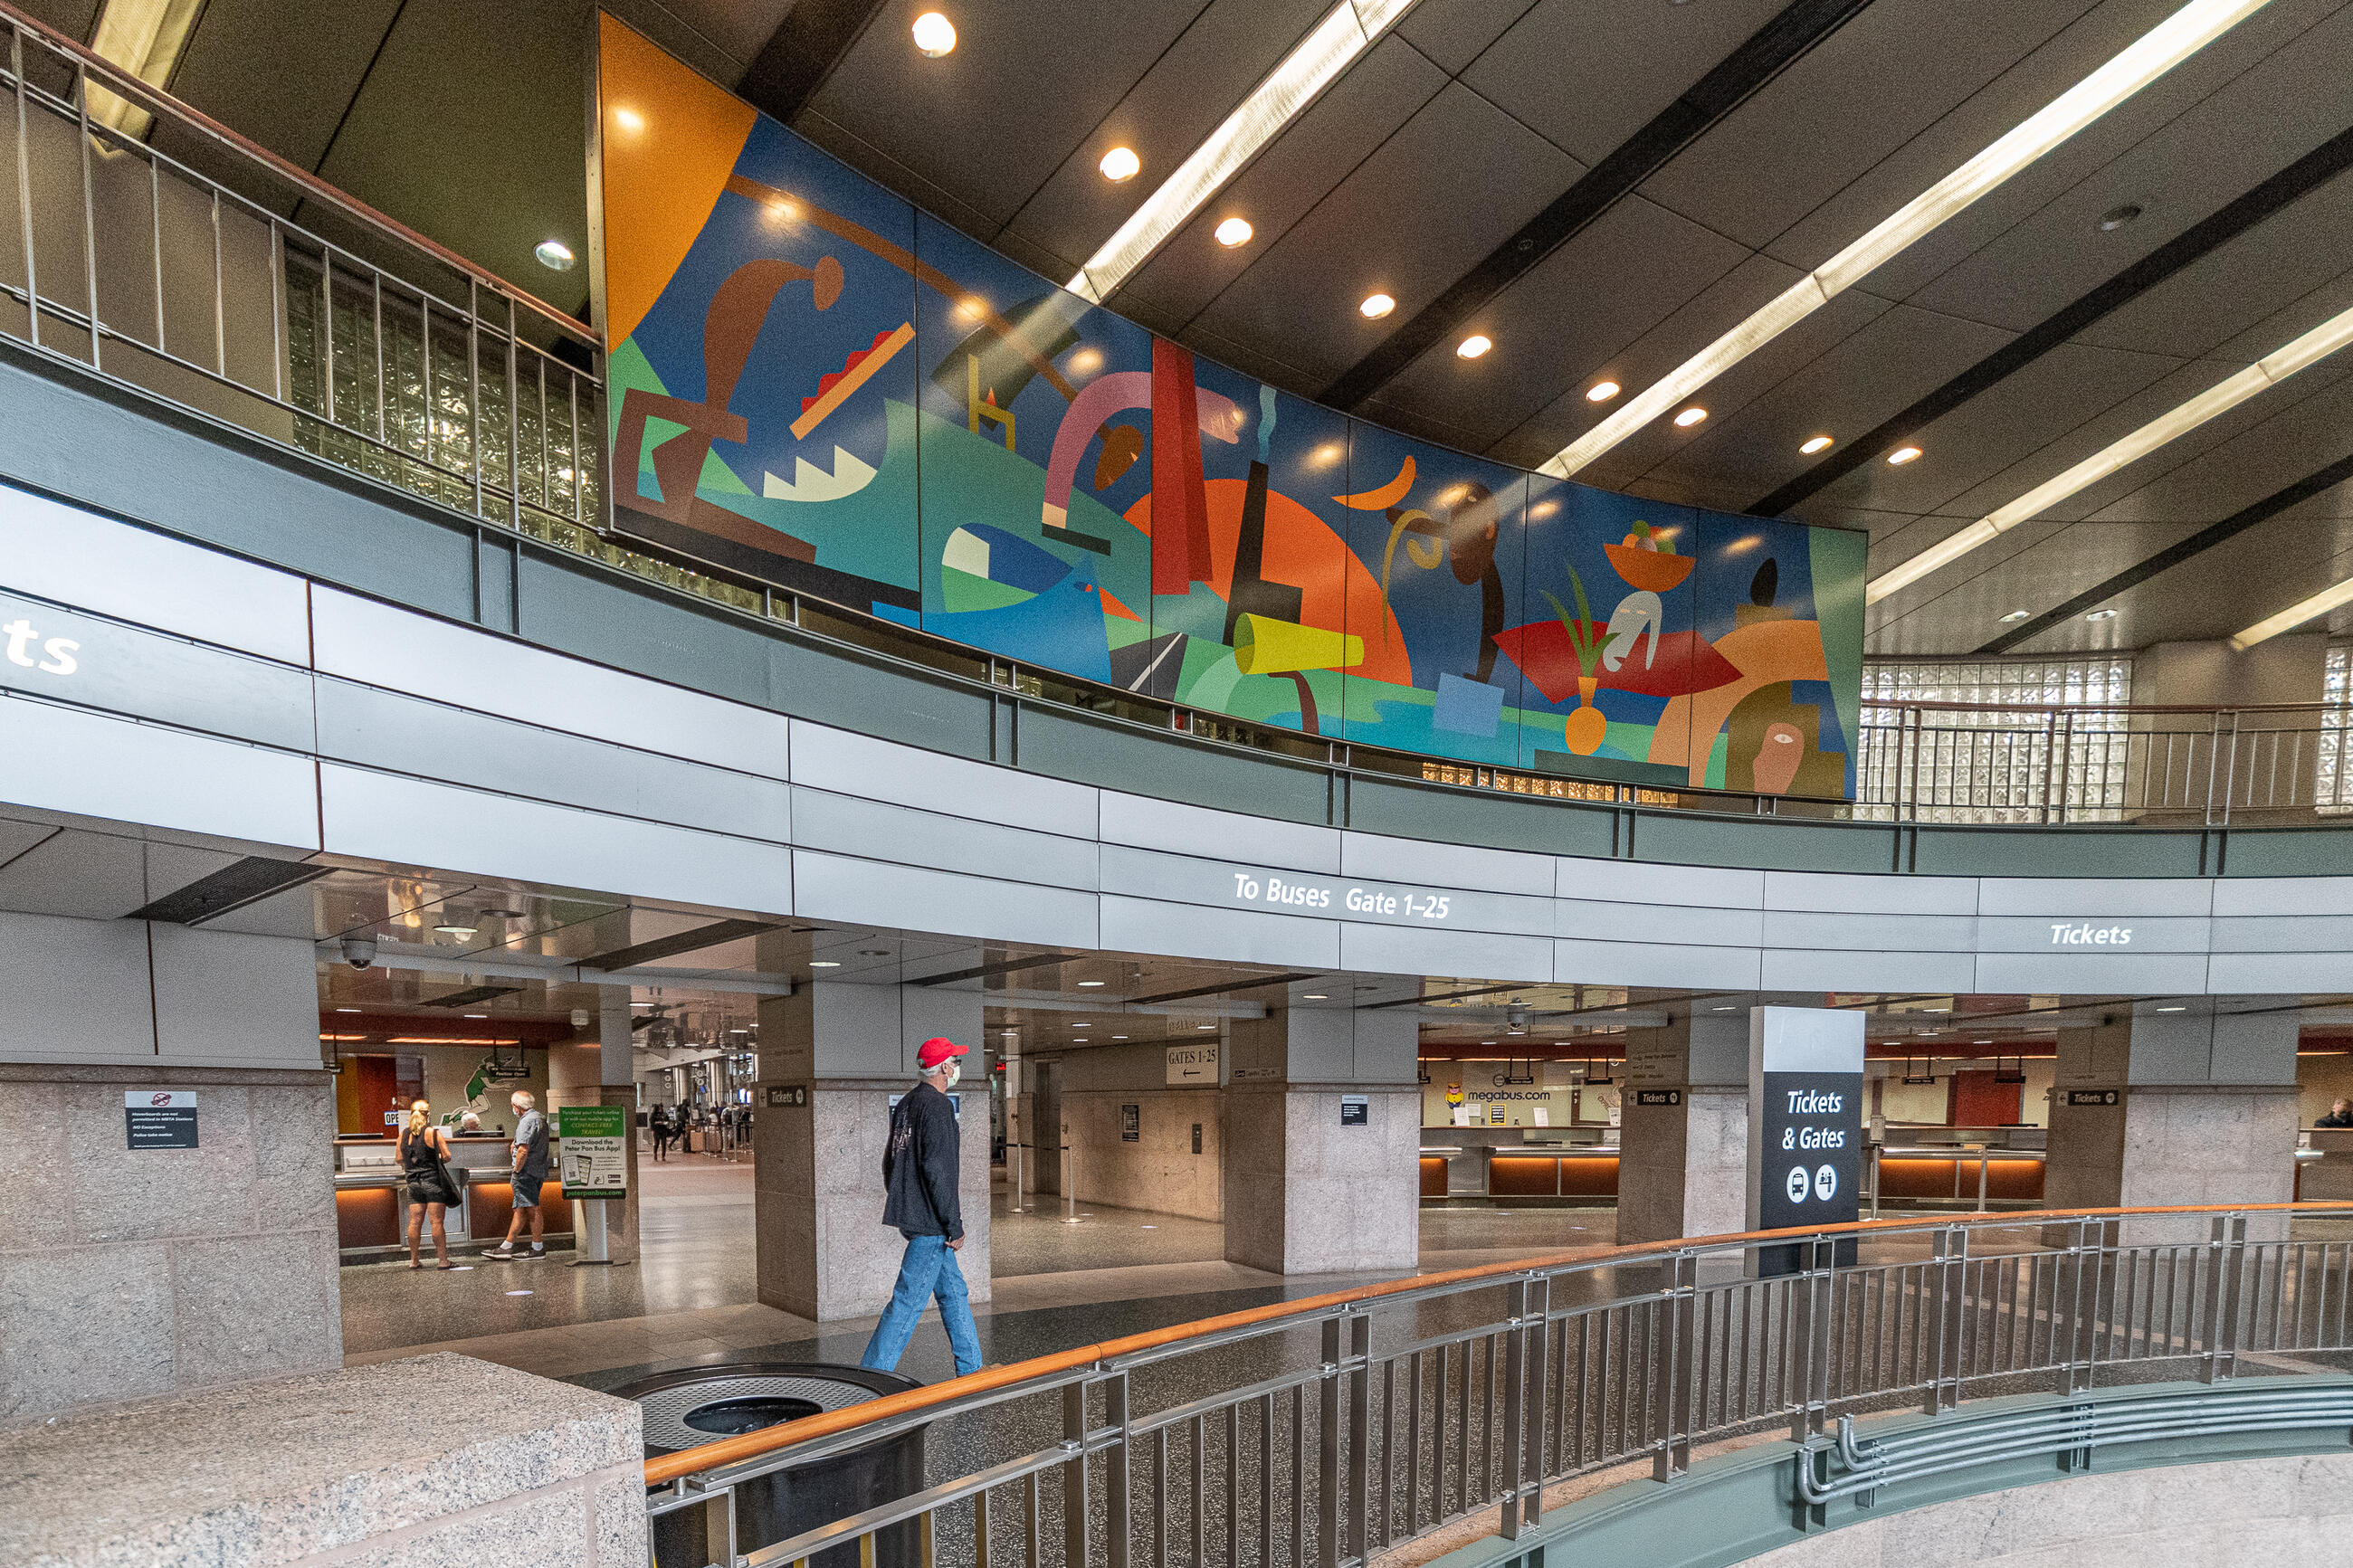 A mural painted by Todd McKie at South Station's bus terminal. 